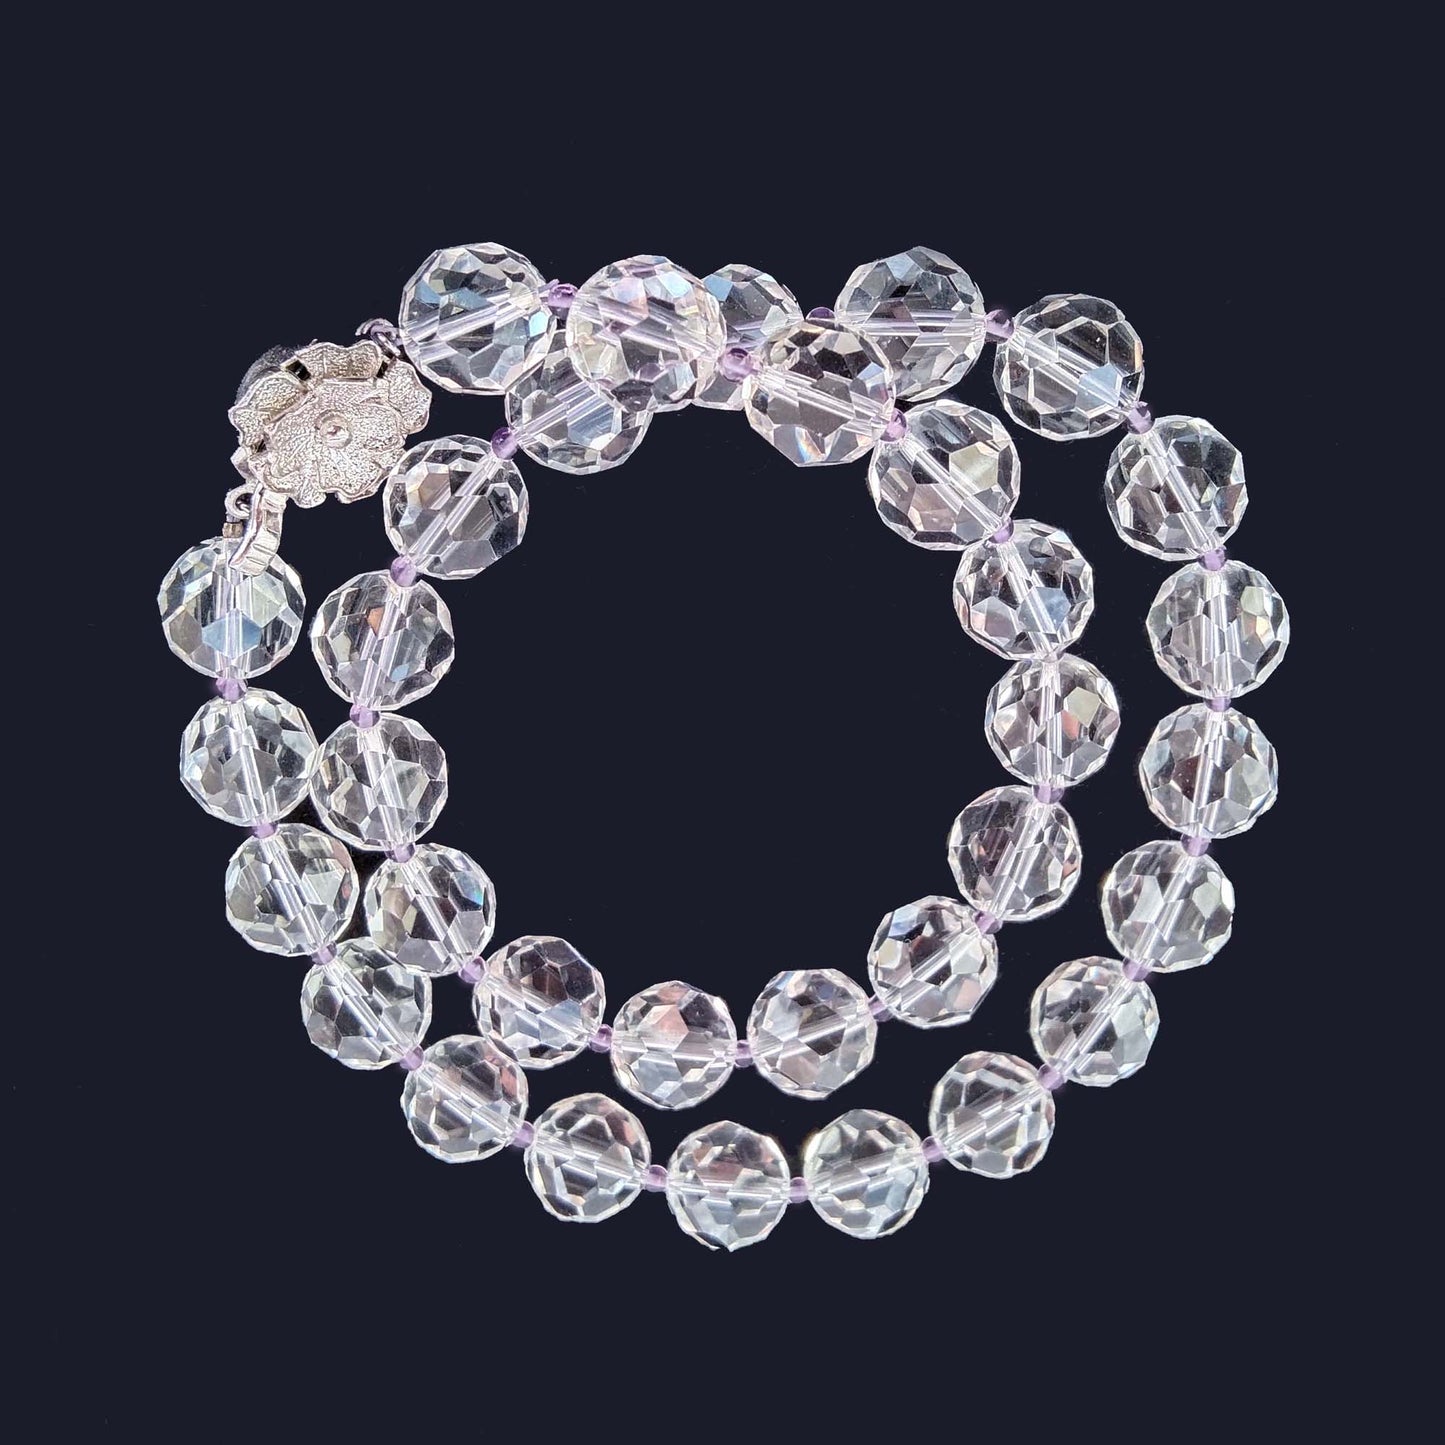 Faceted Clear Quartz and Amethyst Bead Necklace with Silver Clasp